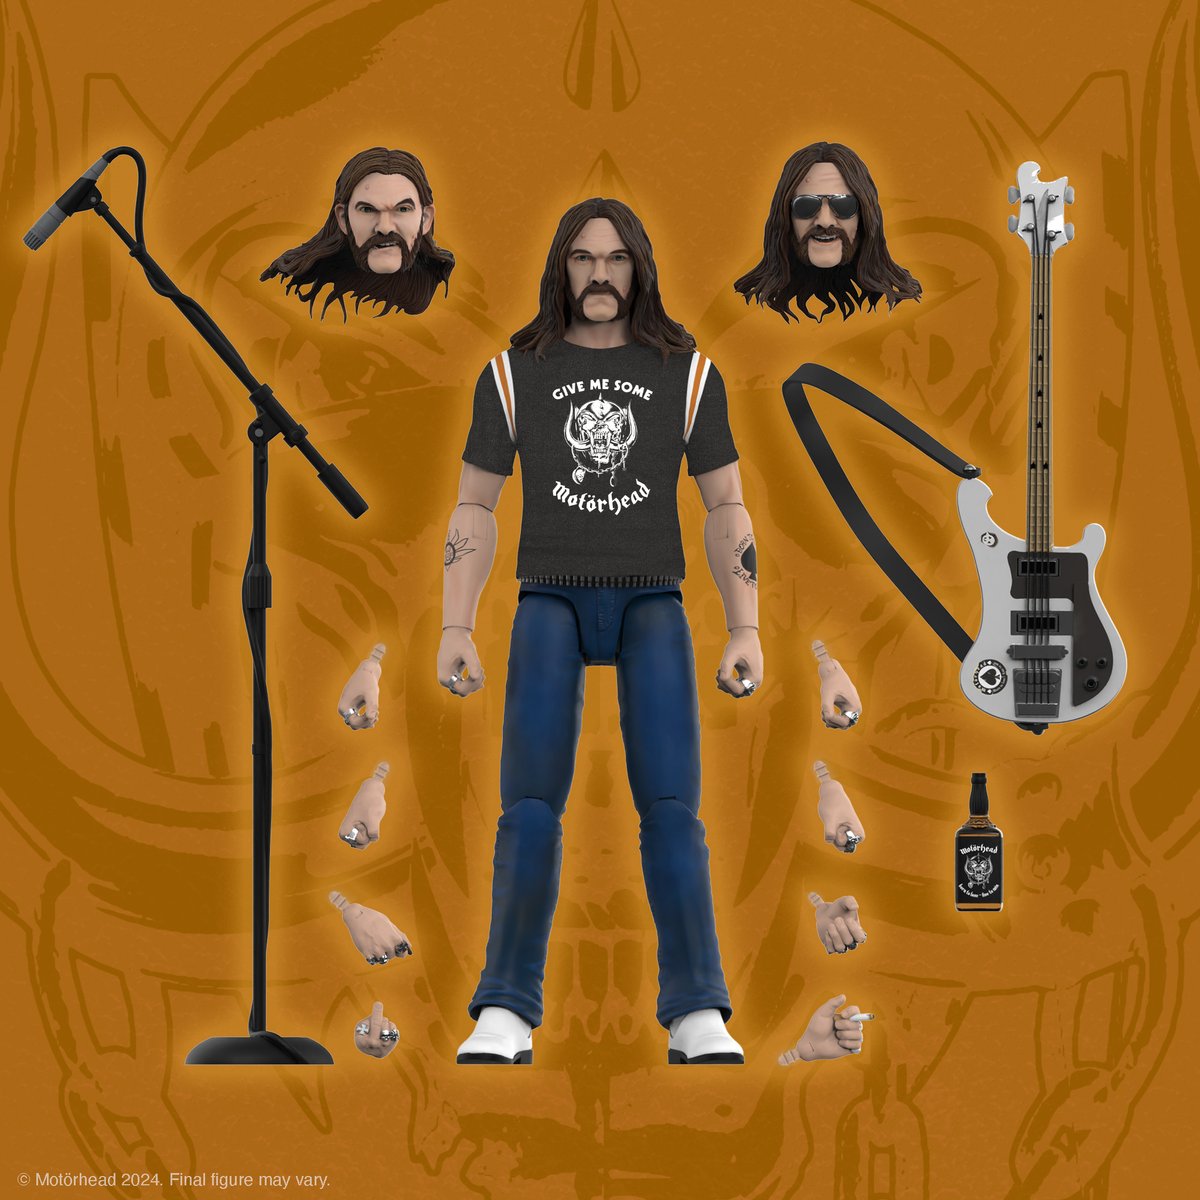 Closing soon! The latest 7” scale, highly-articulated Motörhead ULTIMATES! Lemmy figure is inspired by the legendary rocker’s look on the band’s epic 1981 European Tour. Available to pre-order now at Super7.com! #Super7